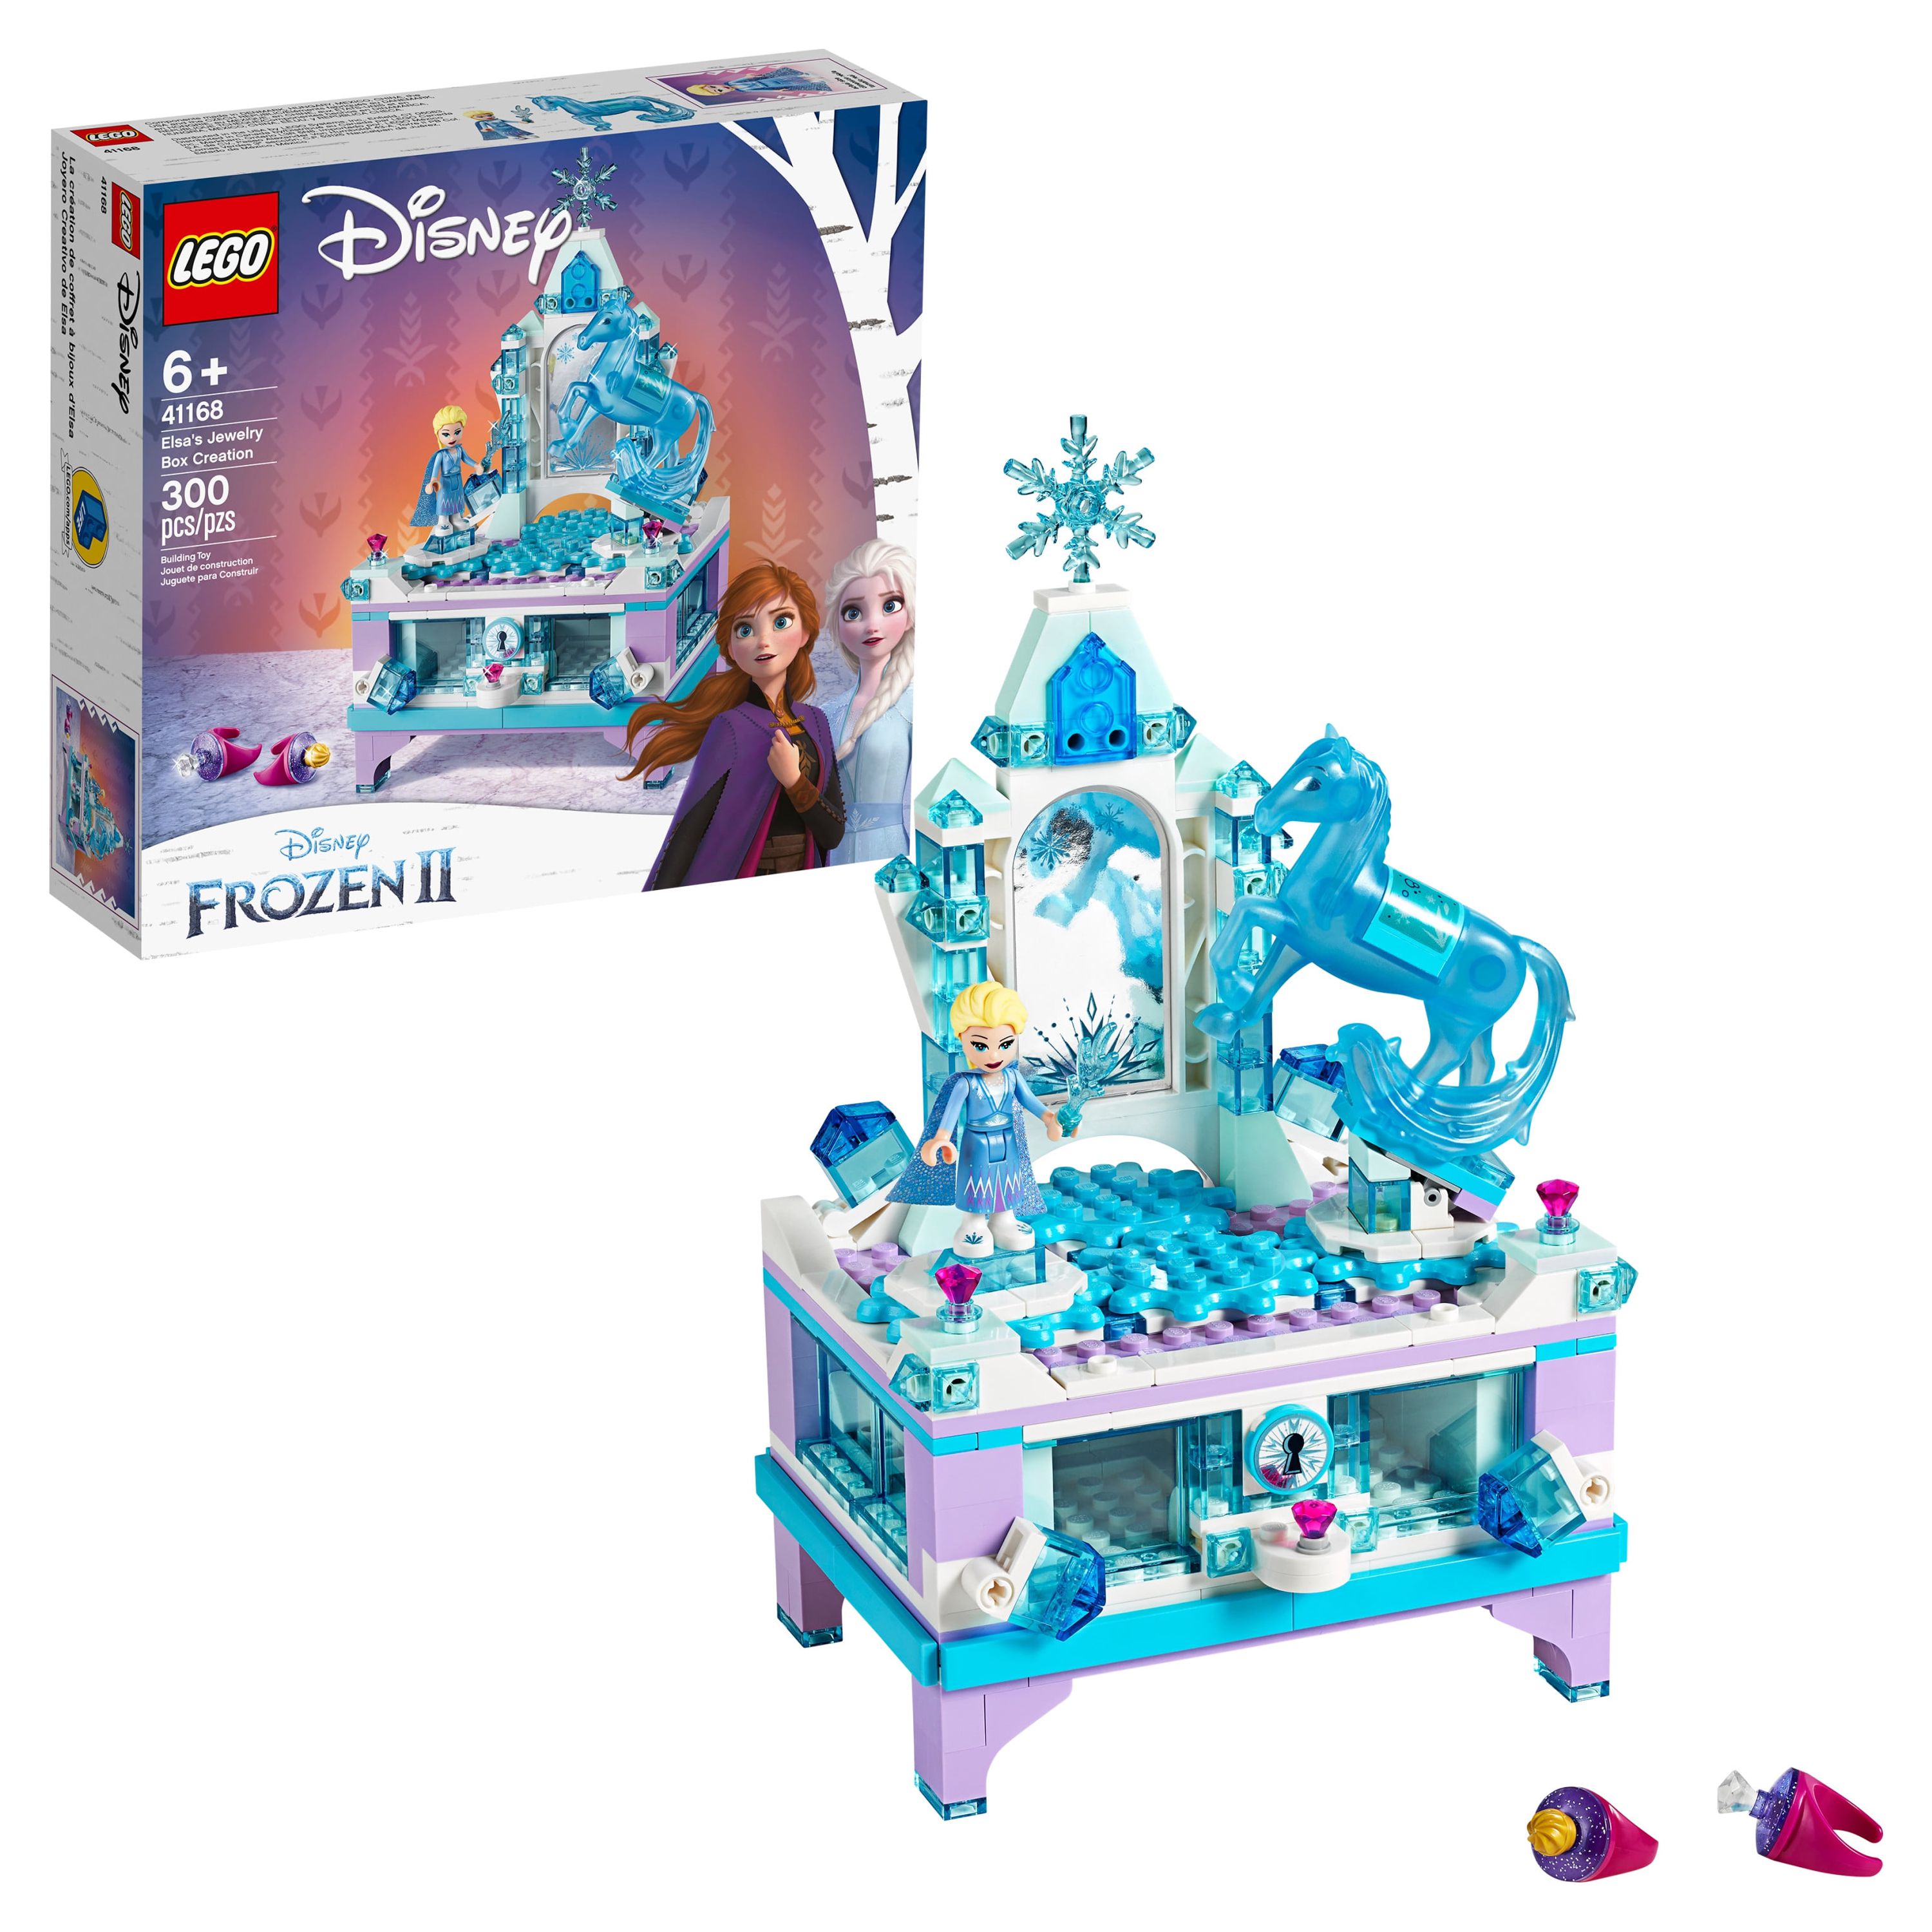 LEGO Disney Frozen 2 Elsa's Jewelry Box Creation 41168, Collectible Frozen Toy with Princess Elsa Mini-Doll and Nokk Figure, Kids Can Build a Jewelry Box with Lockable Drawer & Mirror, Disney Gift - image 1 of 8